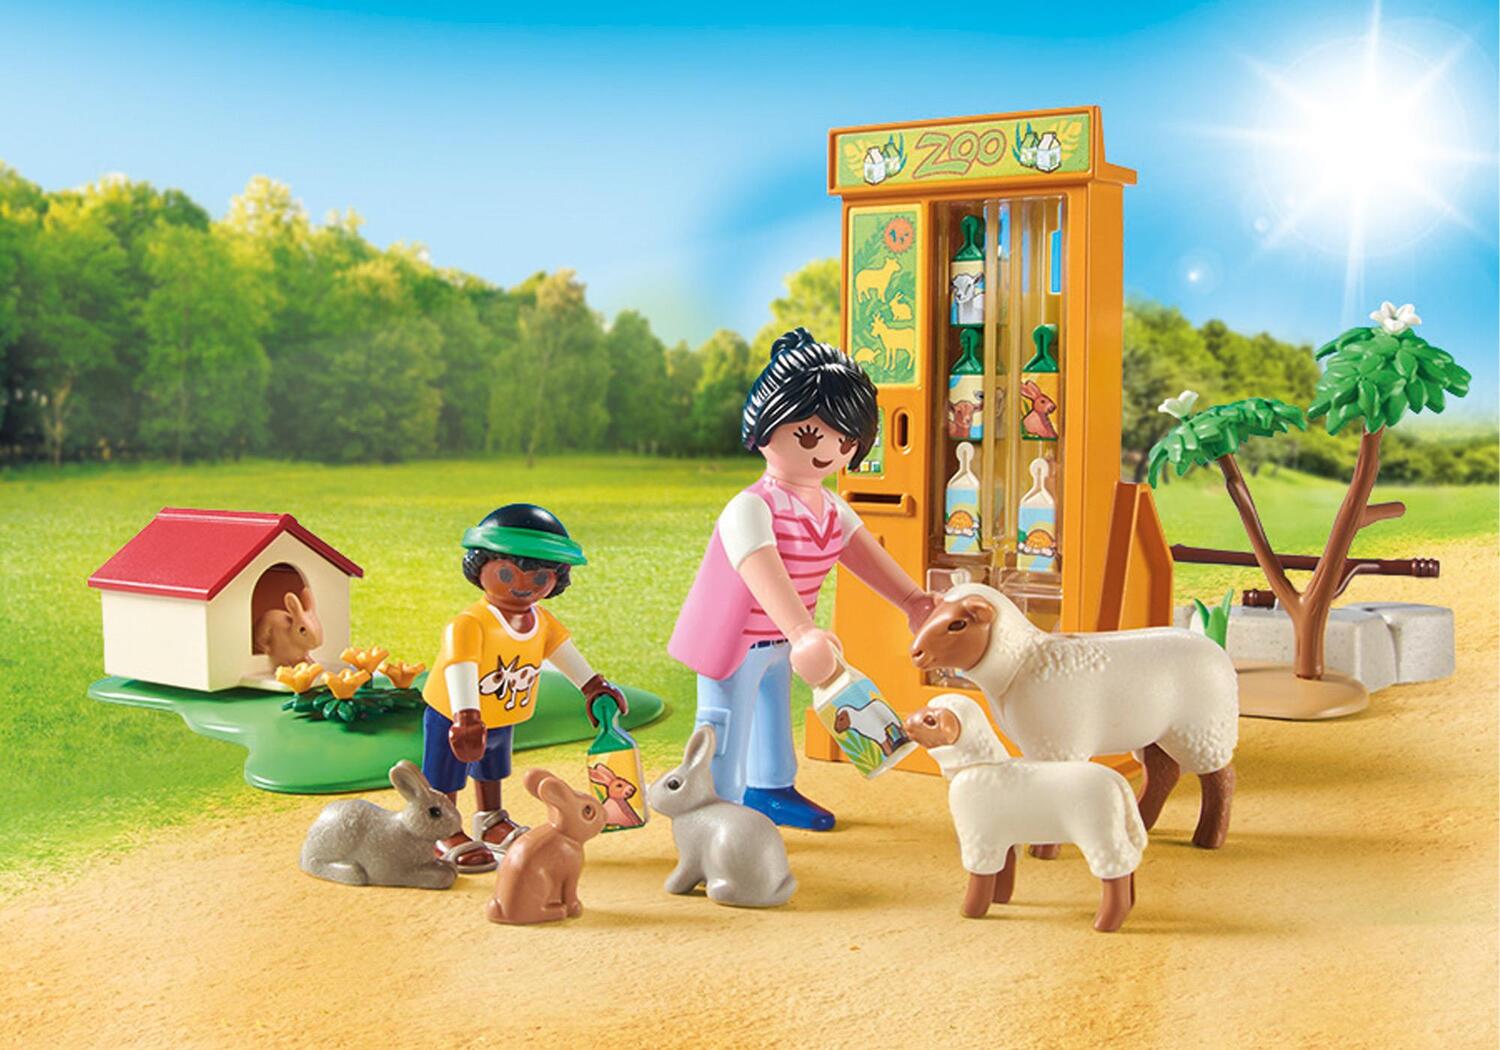 Playmobil Petting Zoo - The Toy Box Hanover